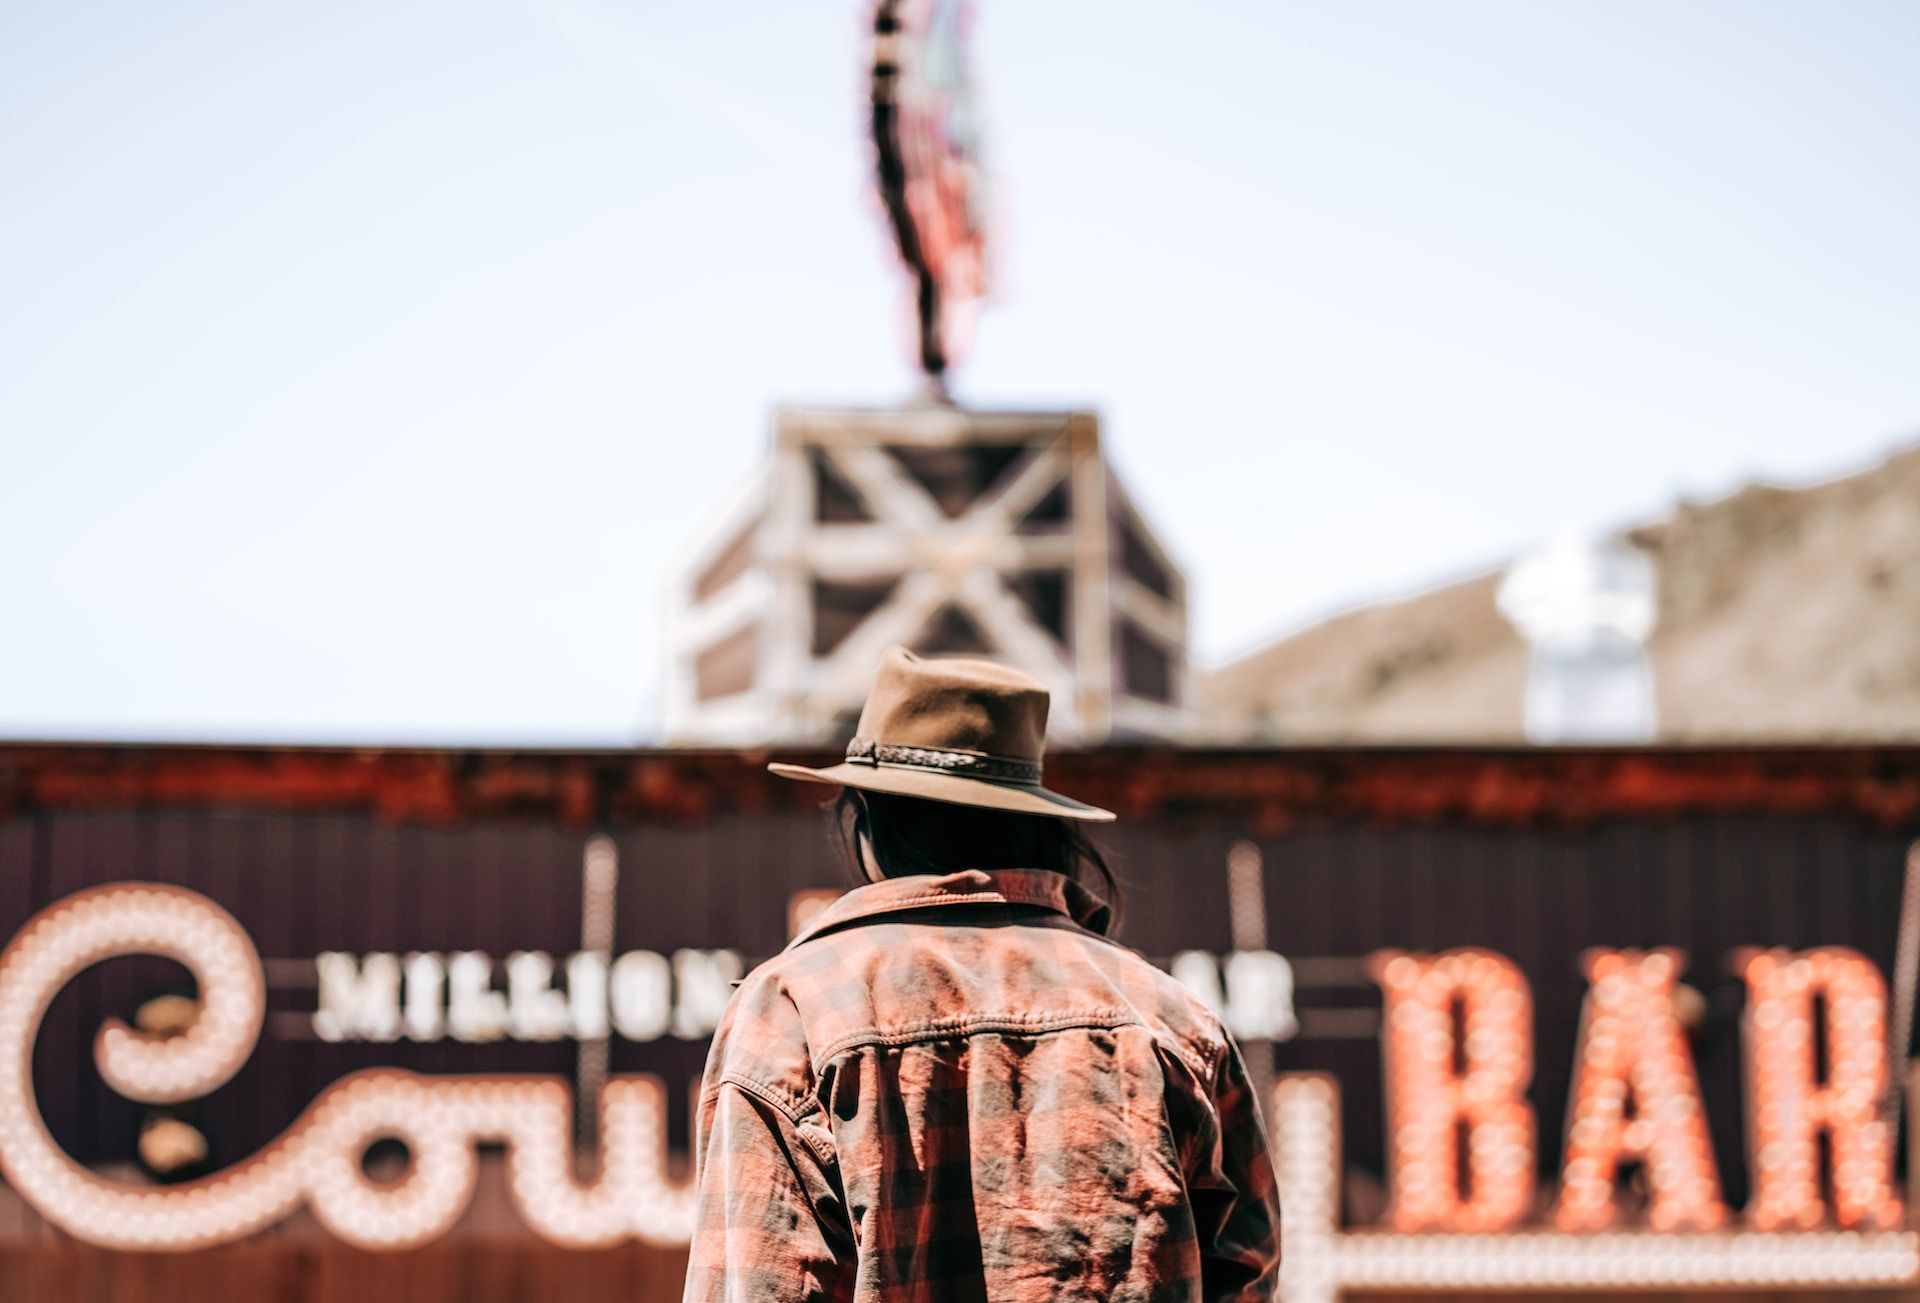 A man stands in front of the famous Cowboy Bar in Jackson, Wyoming